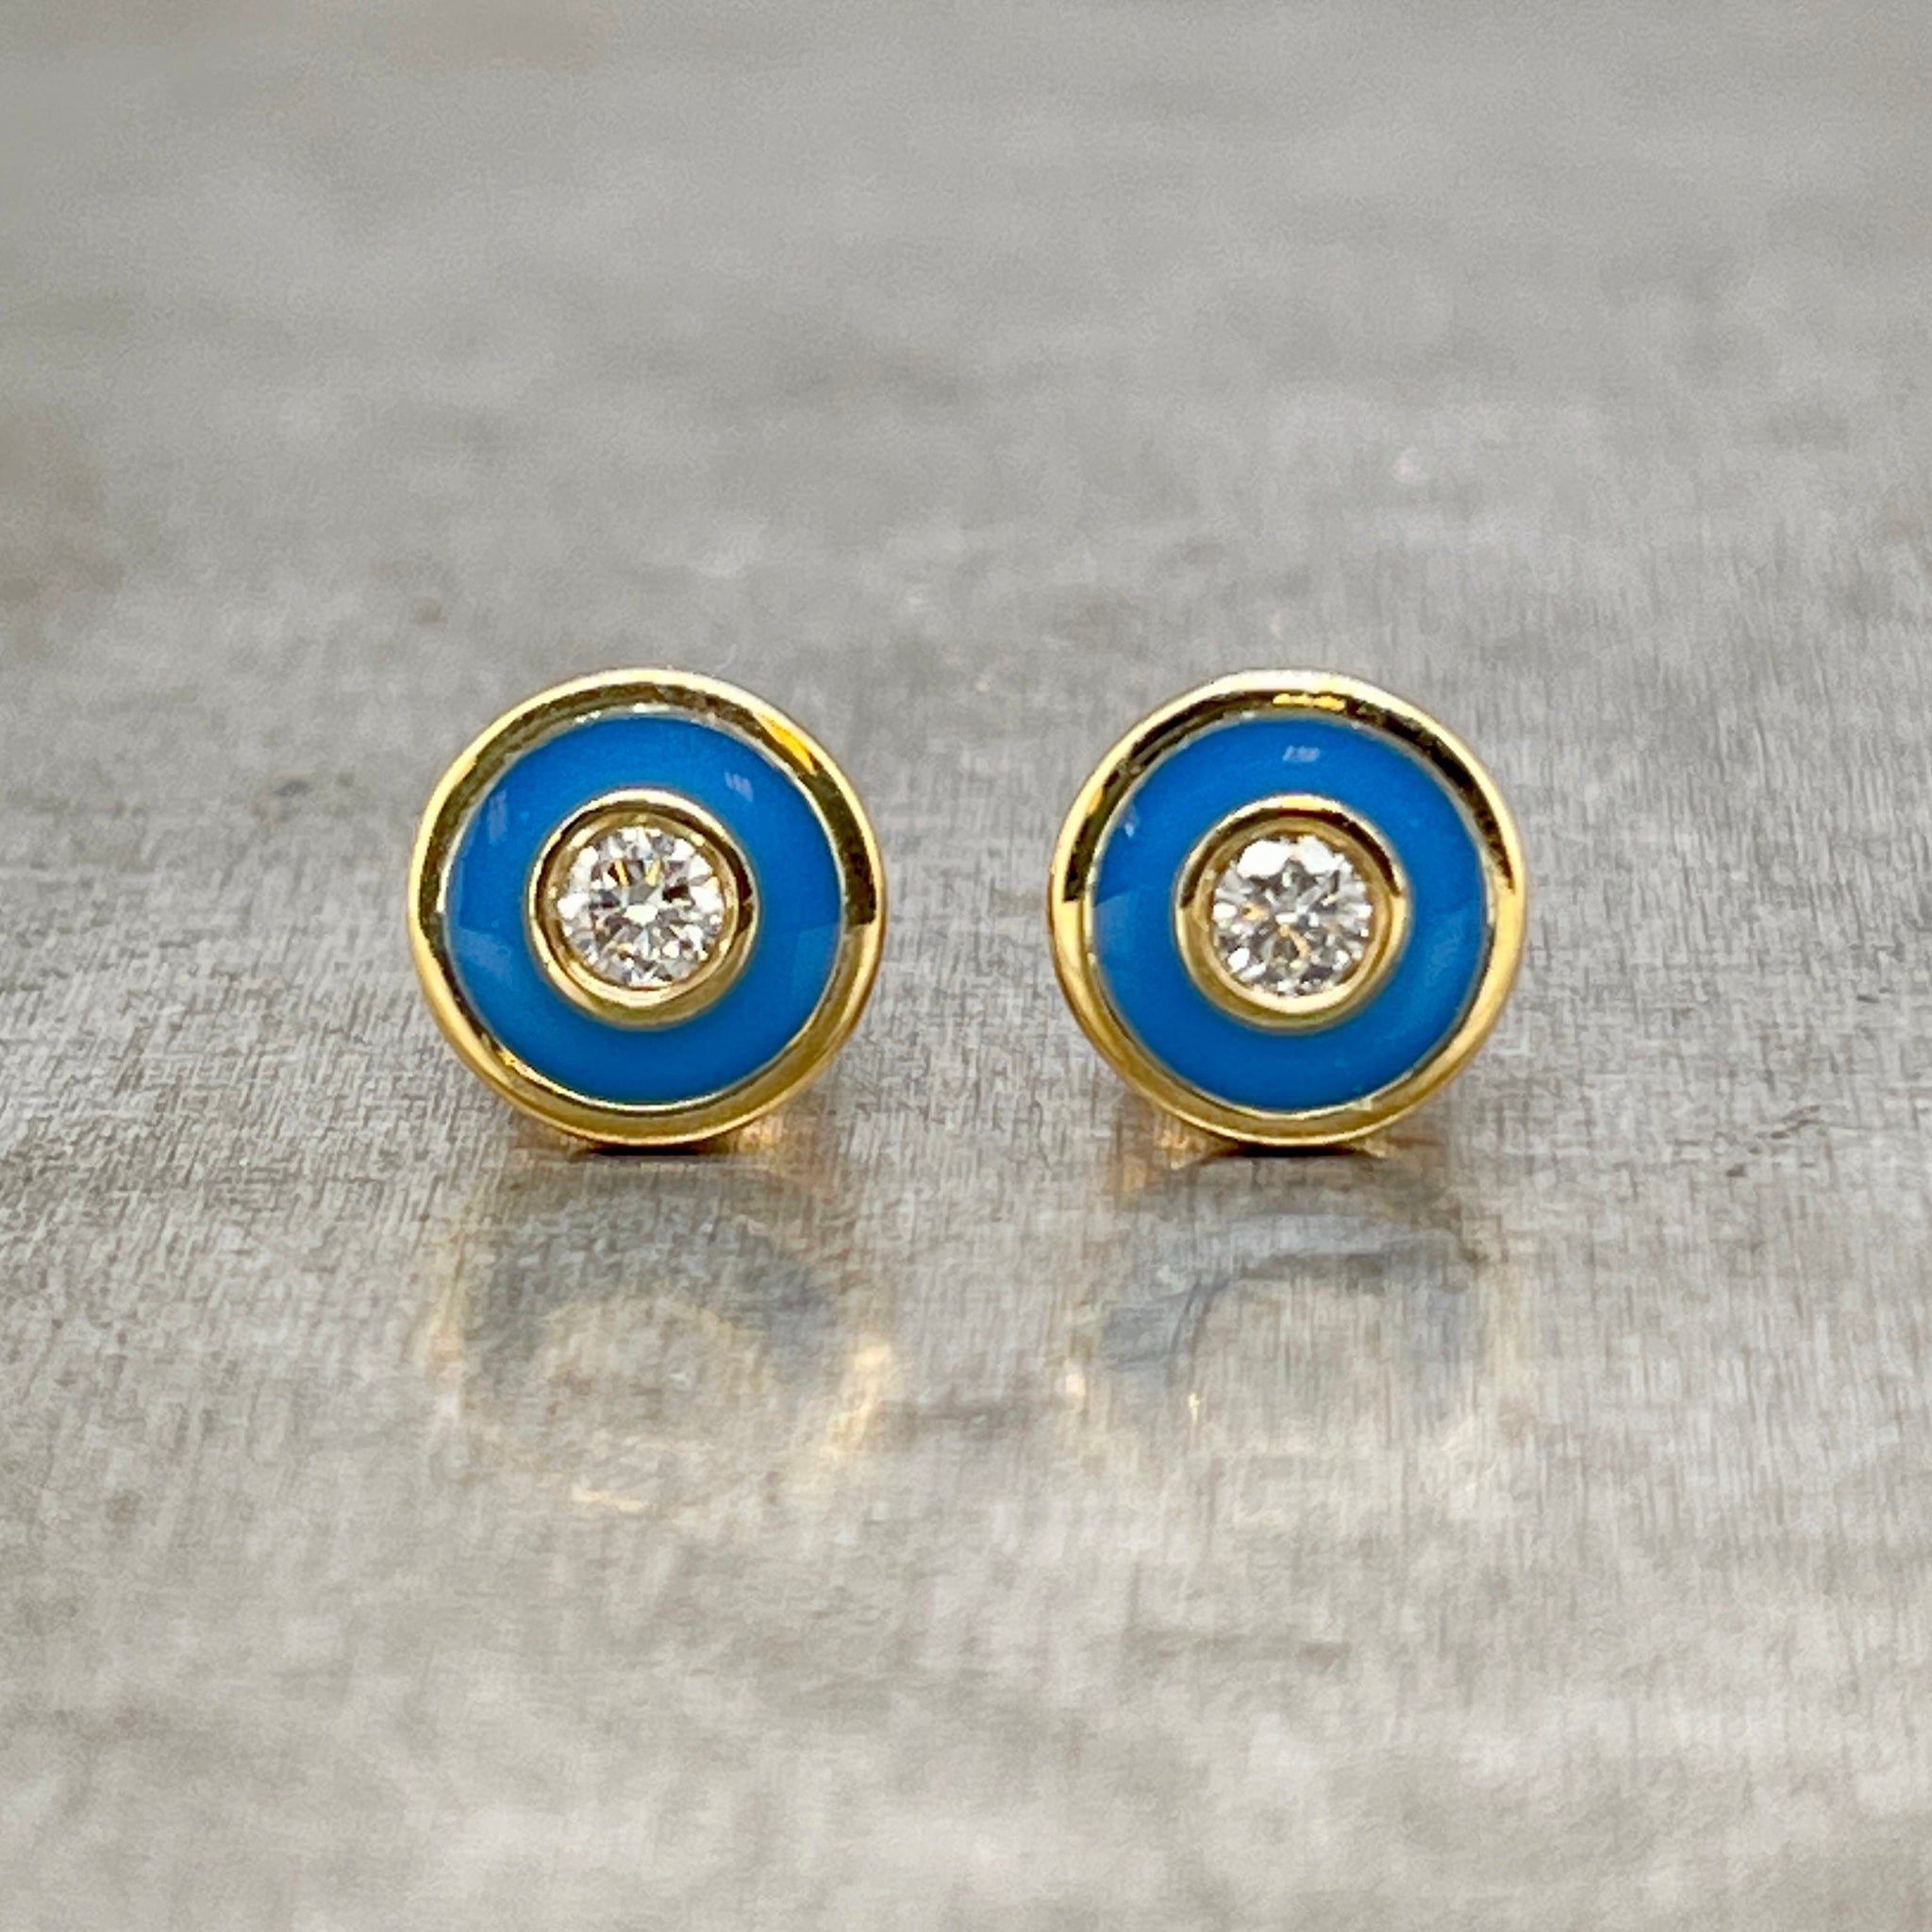 Frontal image of diamond and turquoise enamel studs. A bezel set round diamond is set in the center with a layer of turquoise enamel and then a thin layer of yellow gold.